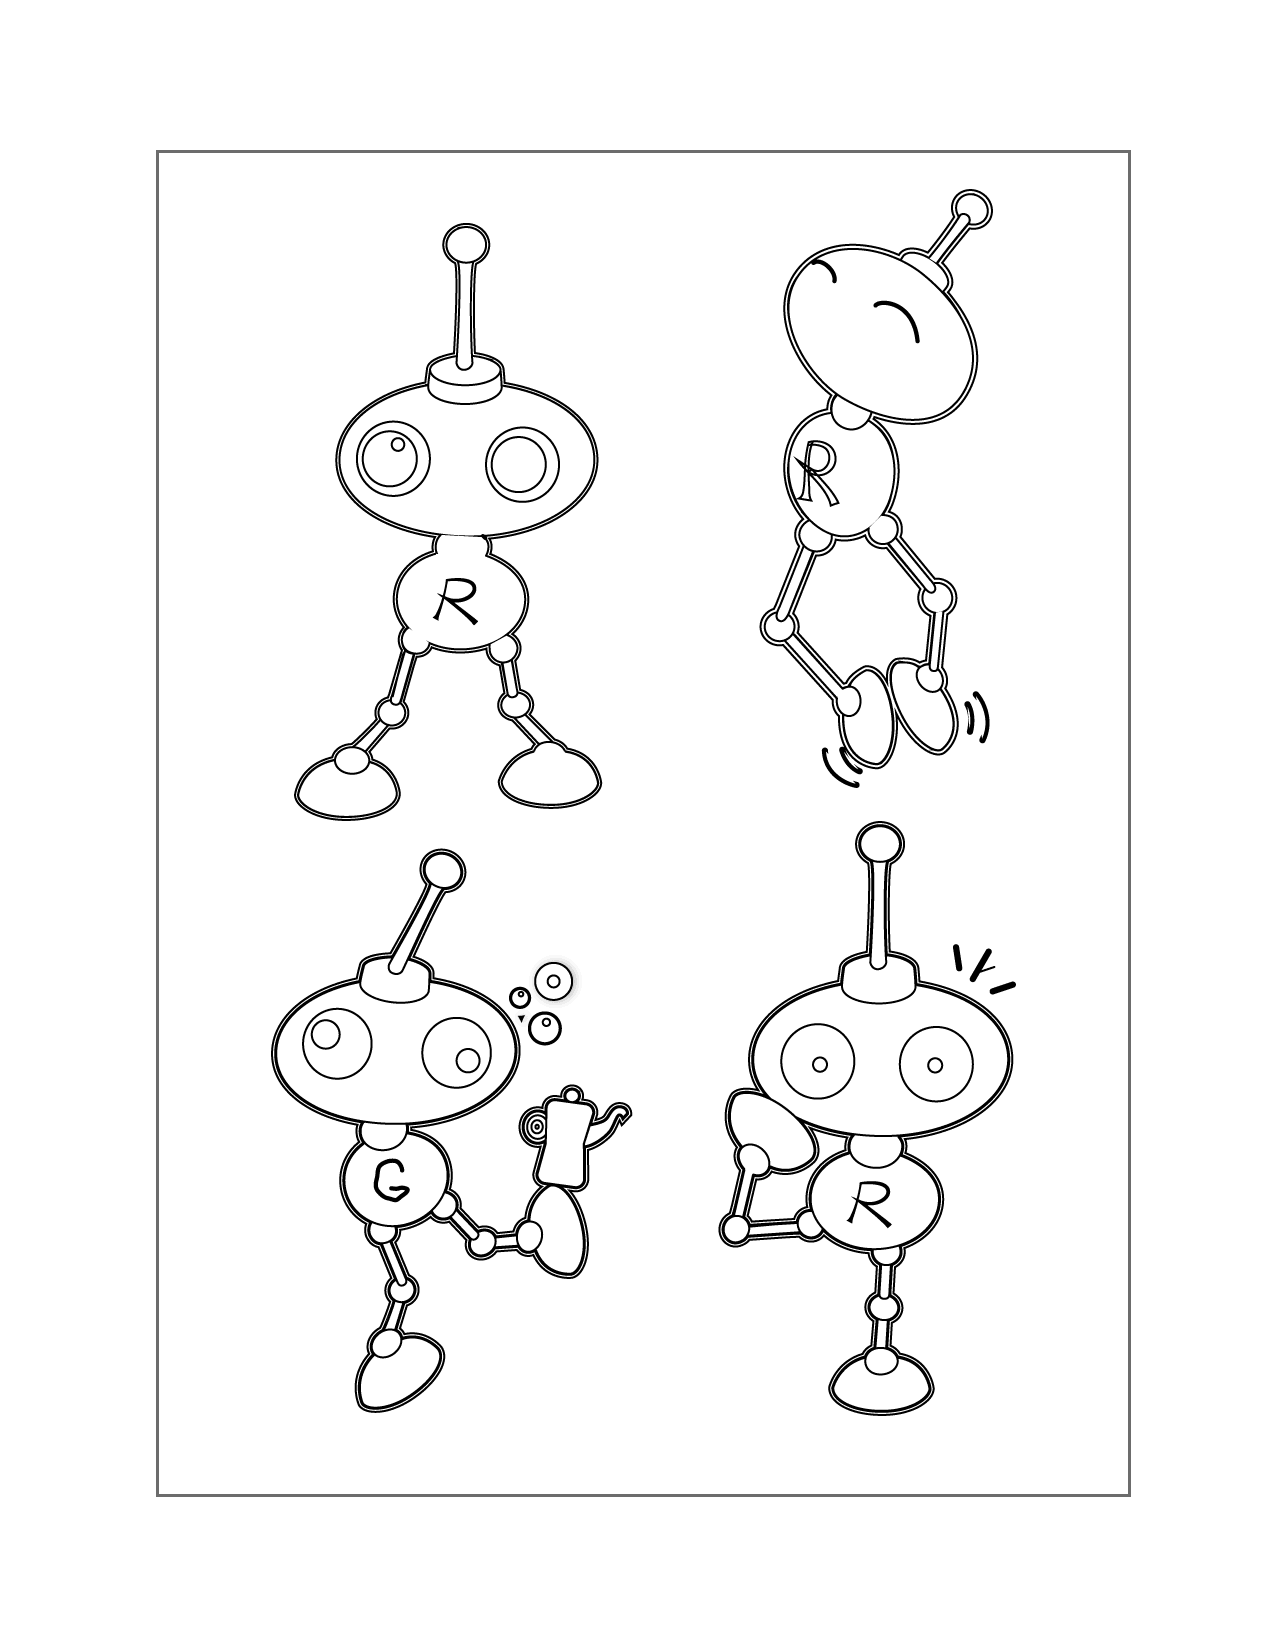 4 Funny Robots Coloring Page